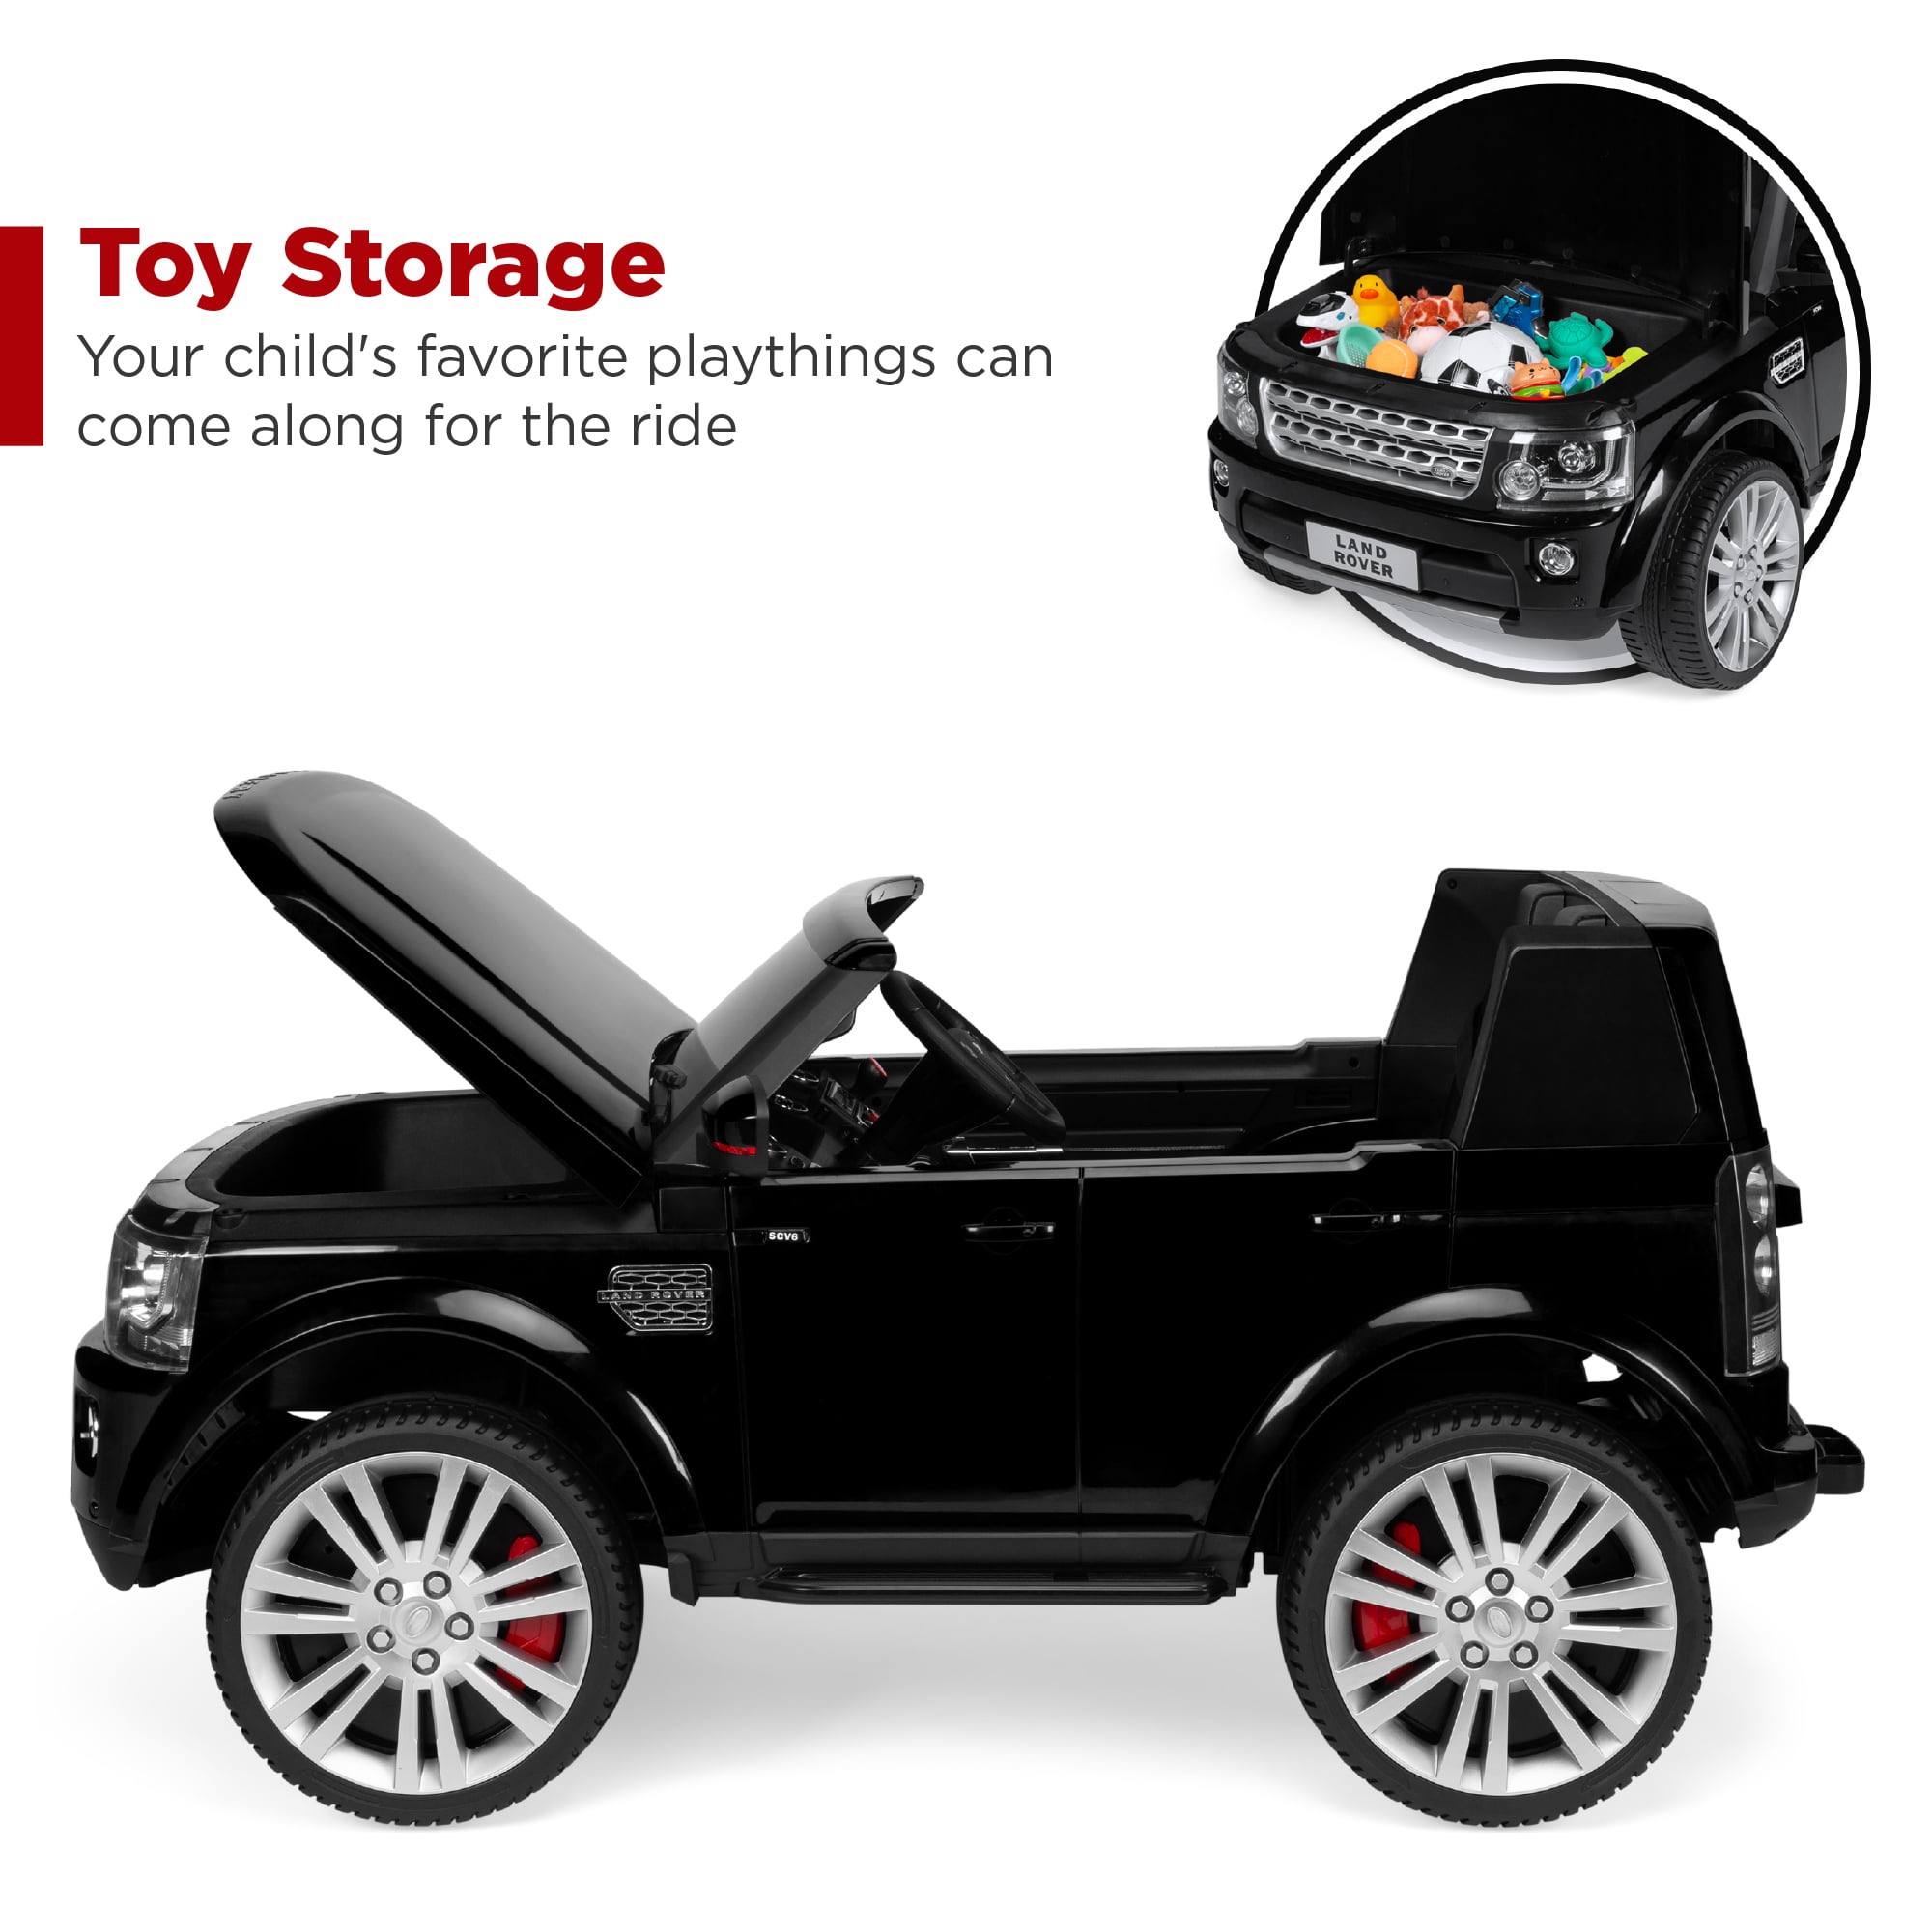 Best Choice Products 12V 3.7 MPH 2-Seater Licensed Land Rover Ride On Car Toy w/ Parent Remote Control - Black - 3